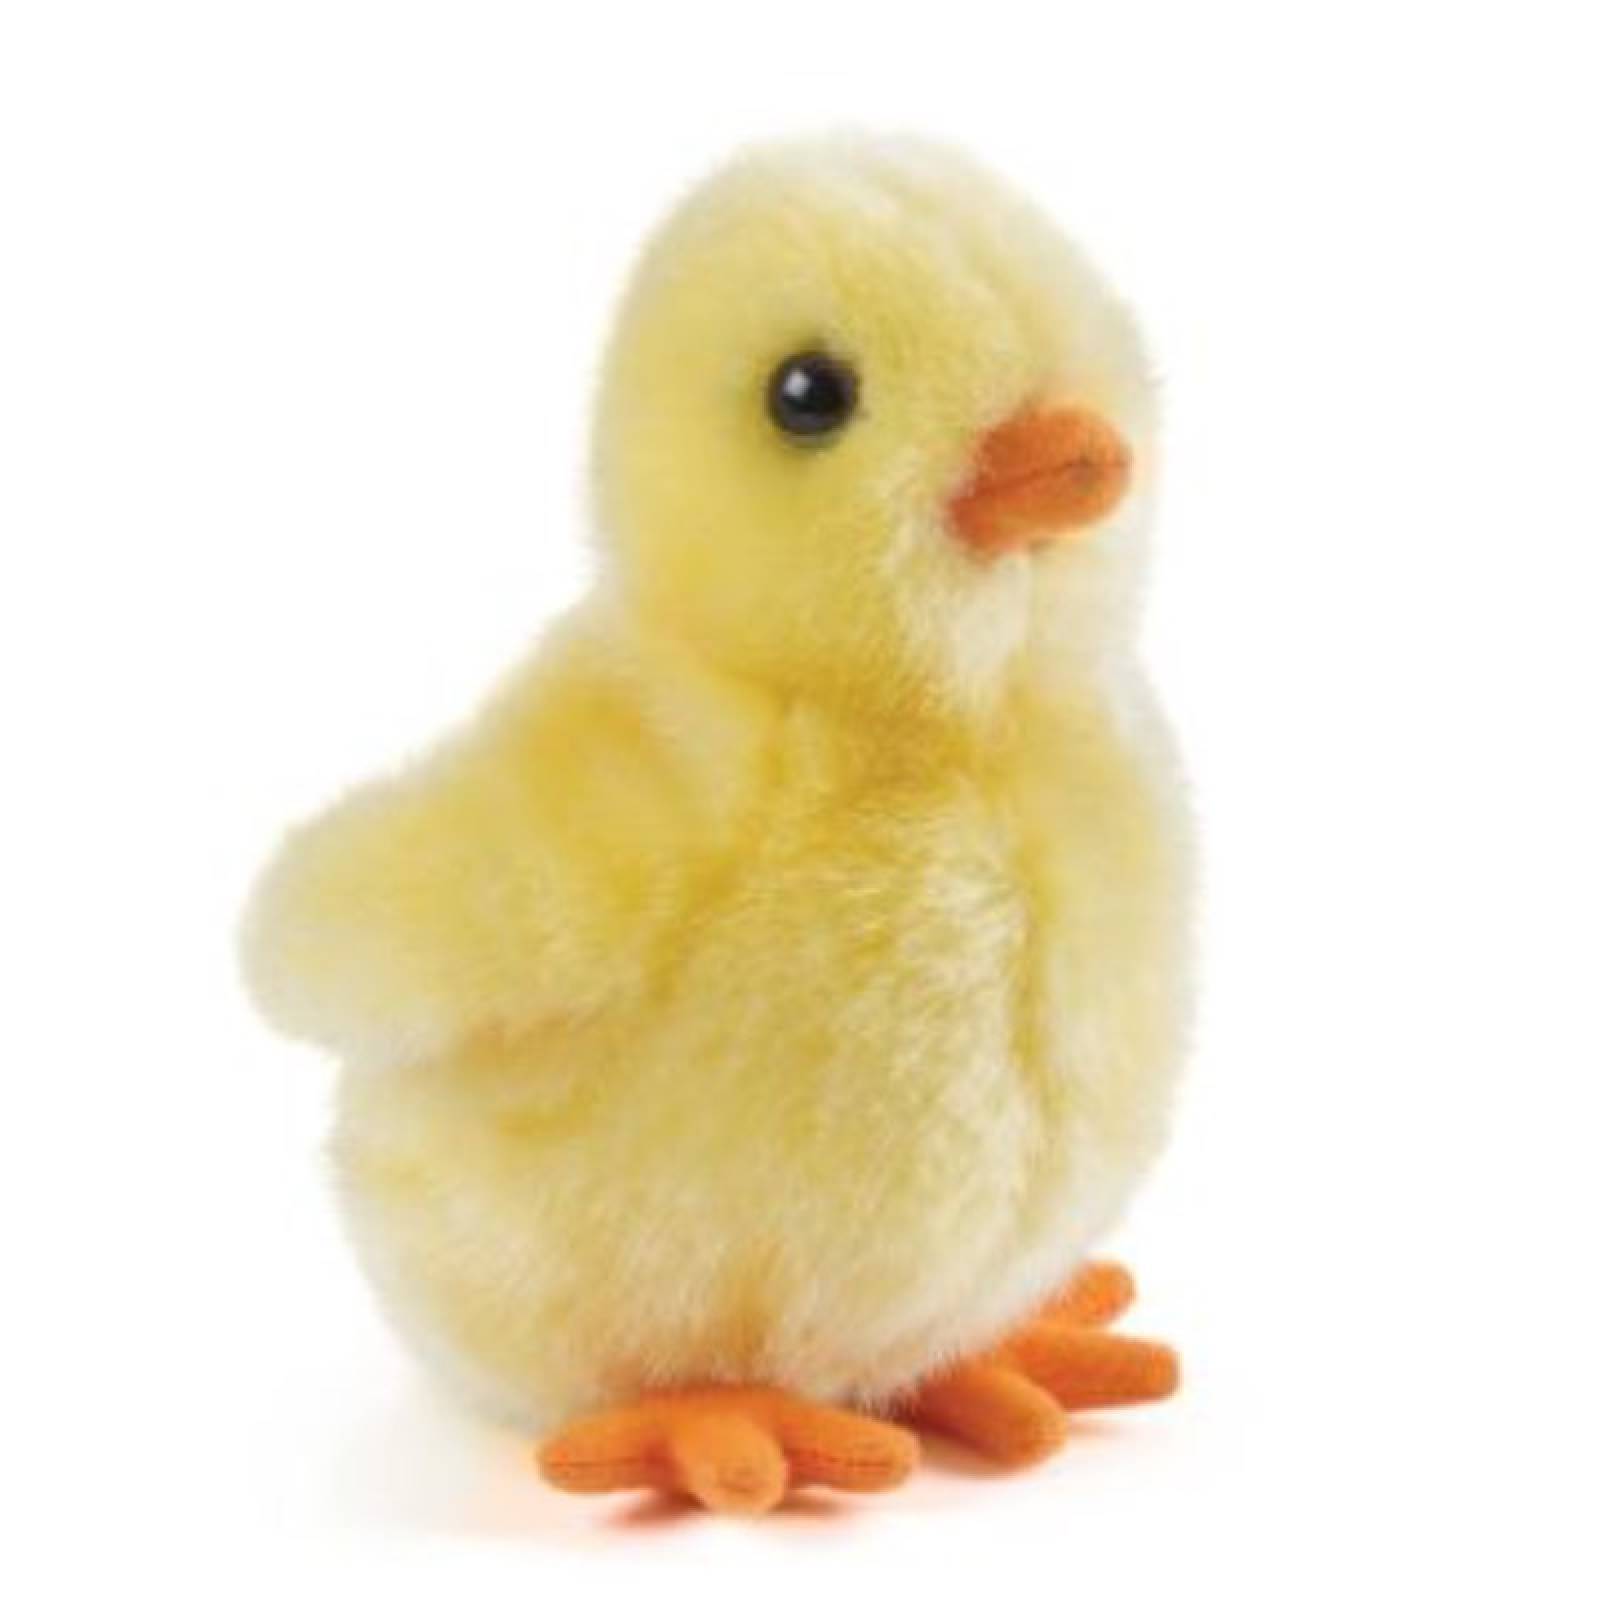 Small Fluffy Chick Soft Toy 0+